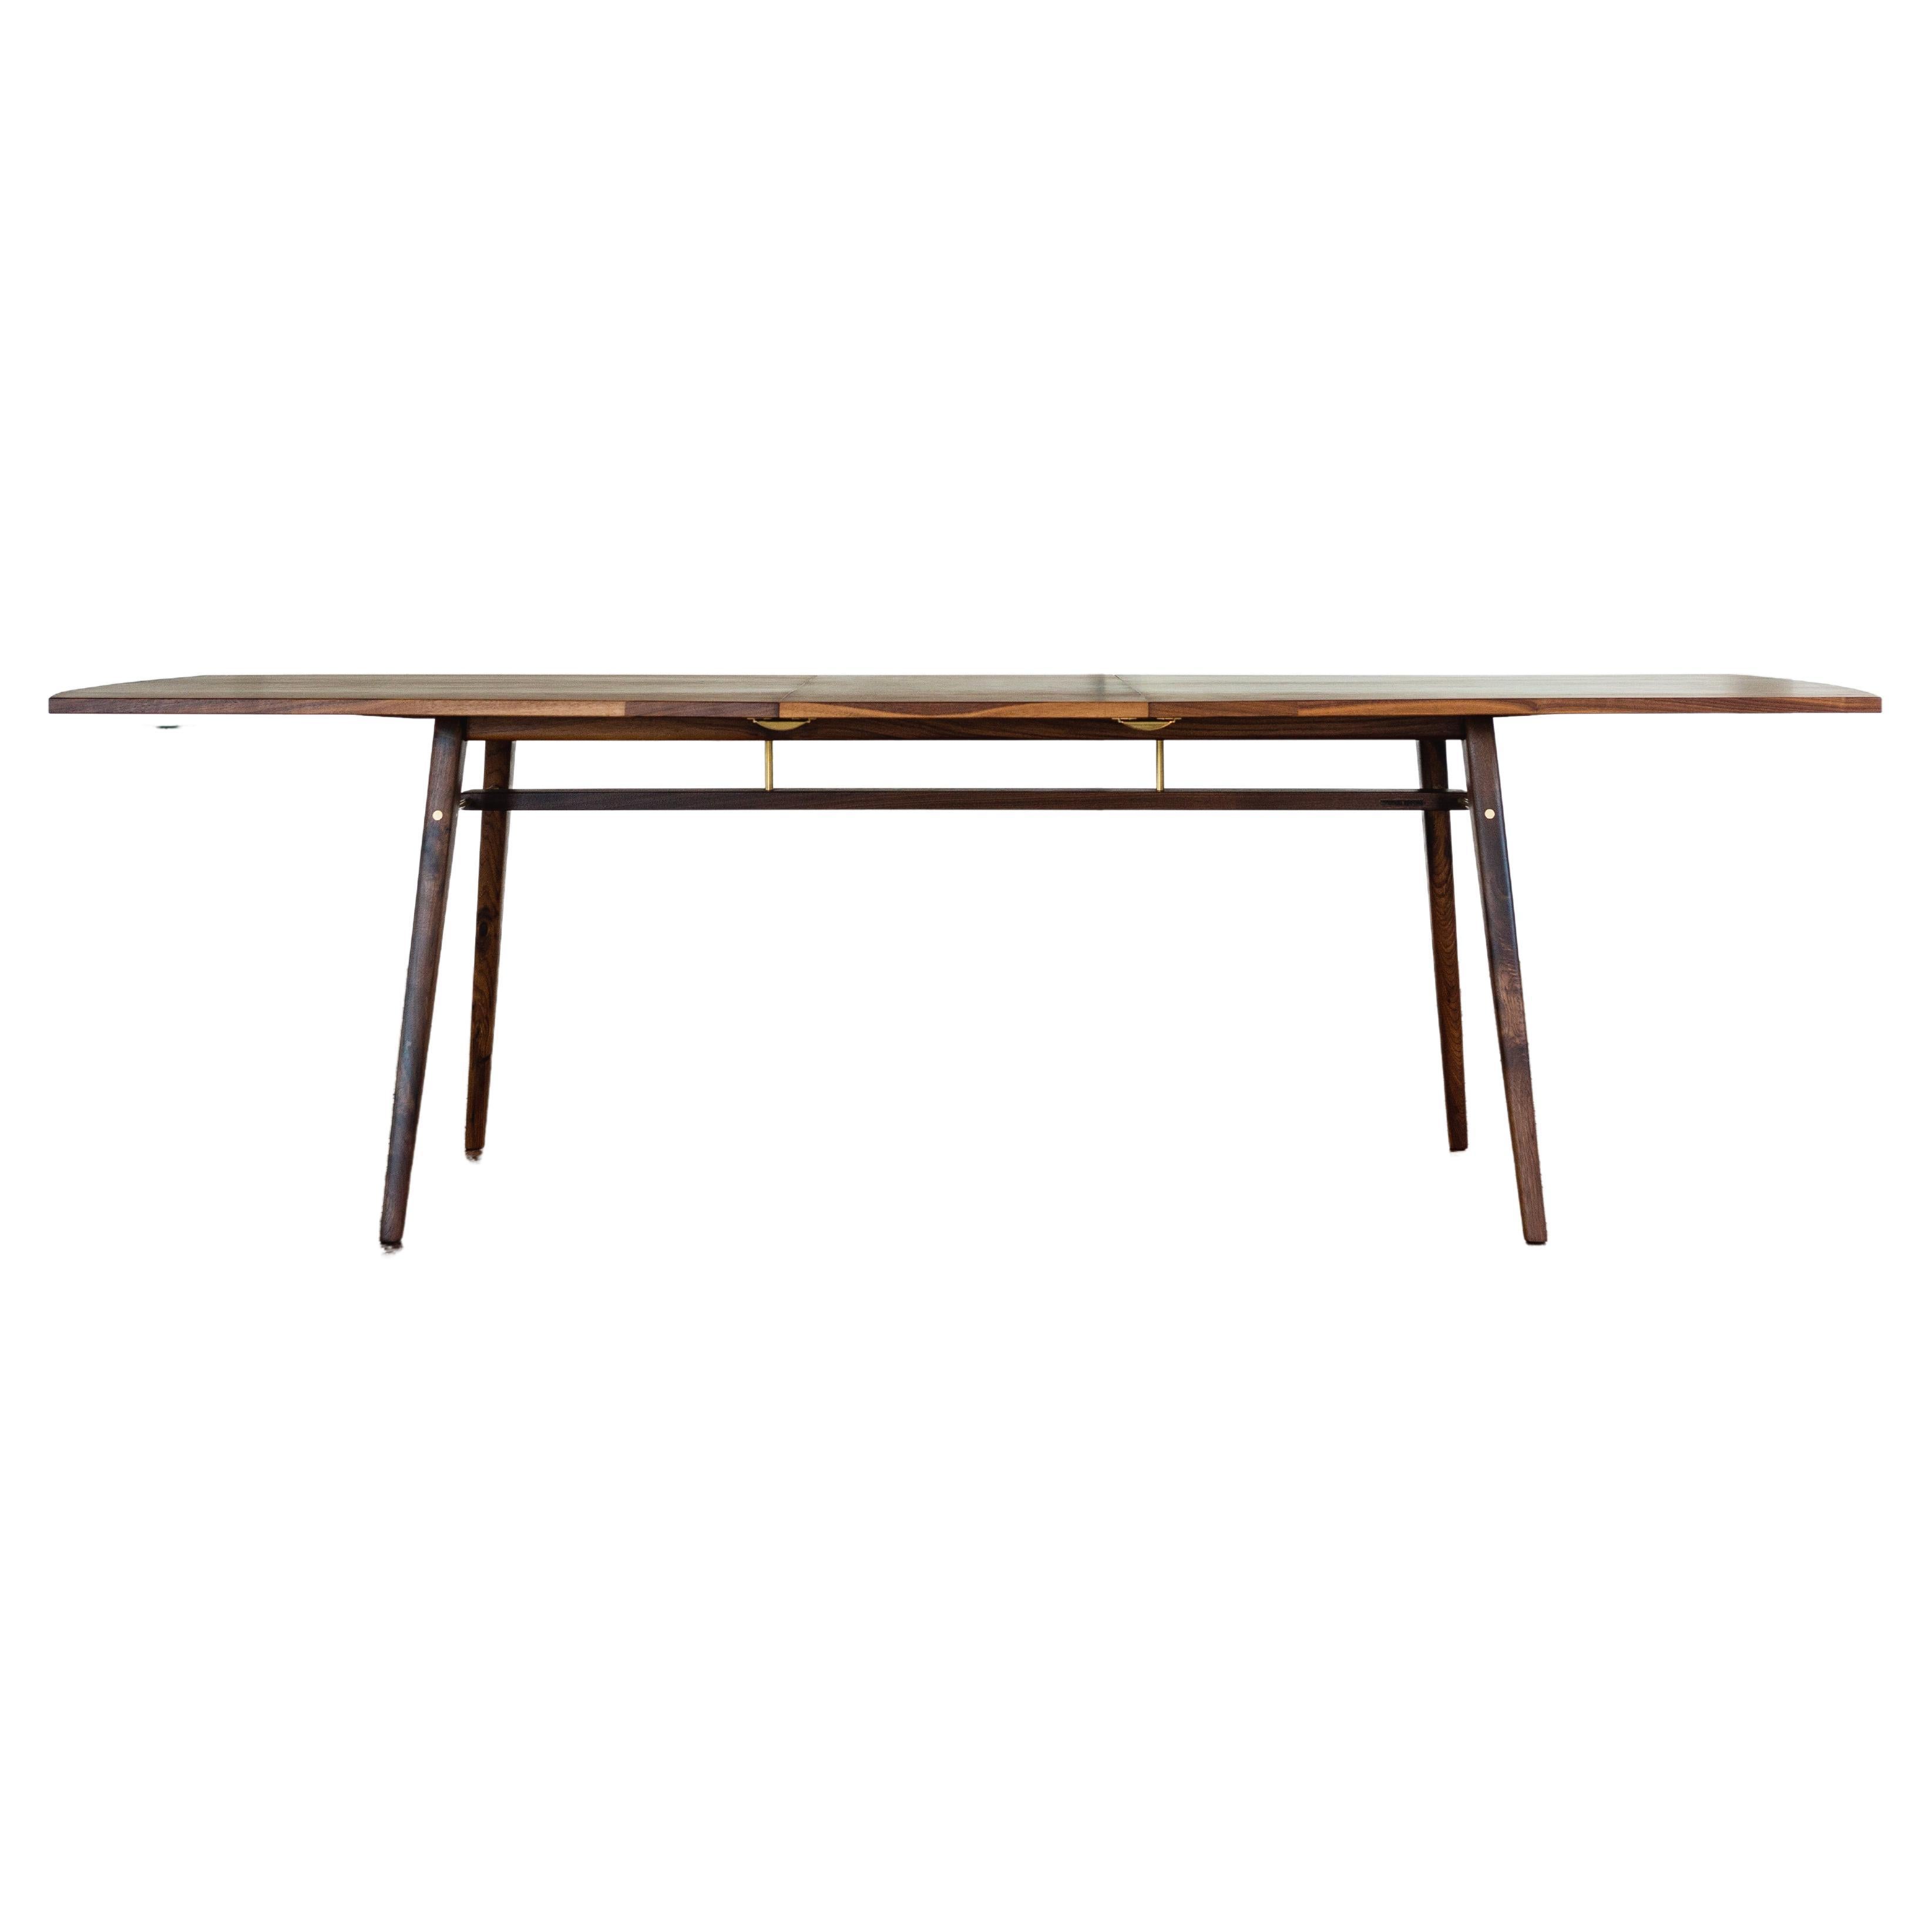 Flint Modern Extension Table in Walnut with Brass Joinery Details